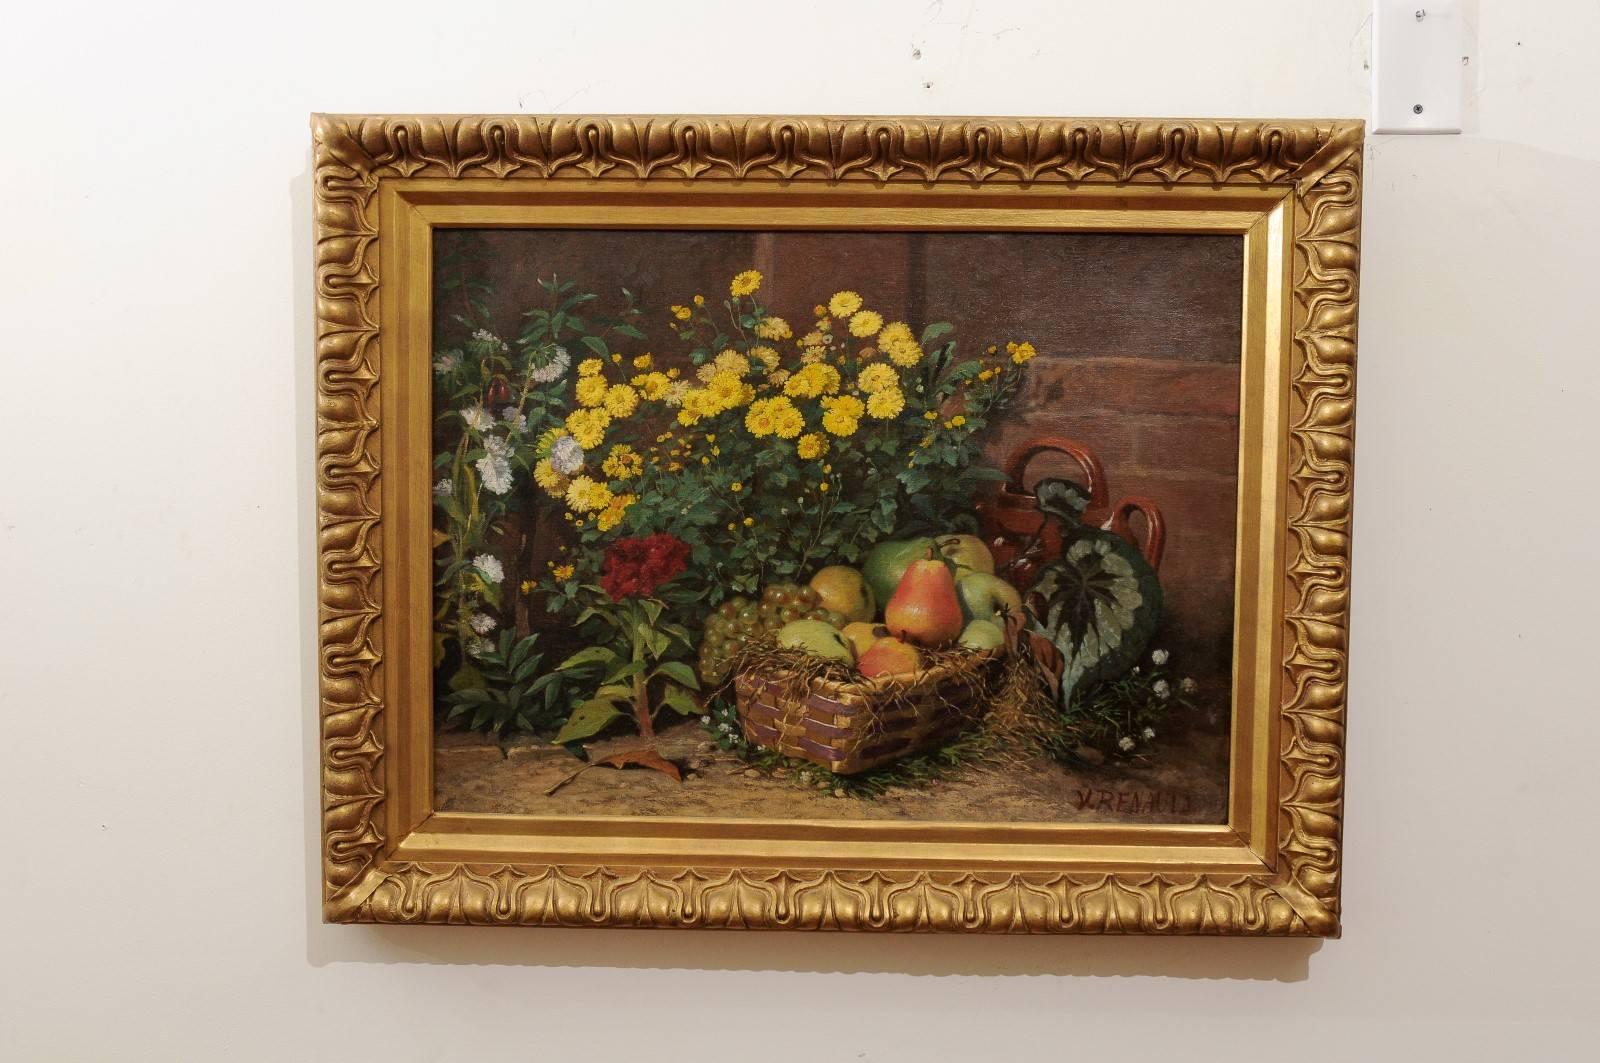 A French, 19th century still life oil painting signed by Victor Jacques Renault-des-Graviers, (1816-1904) and set in a giltwood frame. This French still life painting features an exquisite fruit and floral arrangement tastefully disposed around a